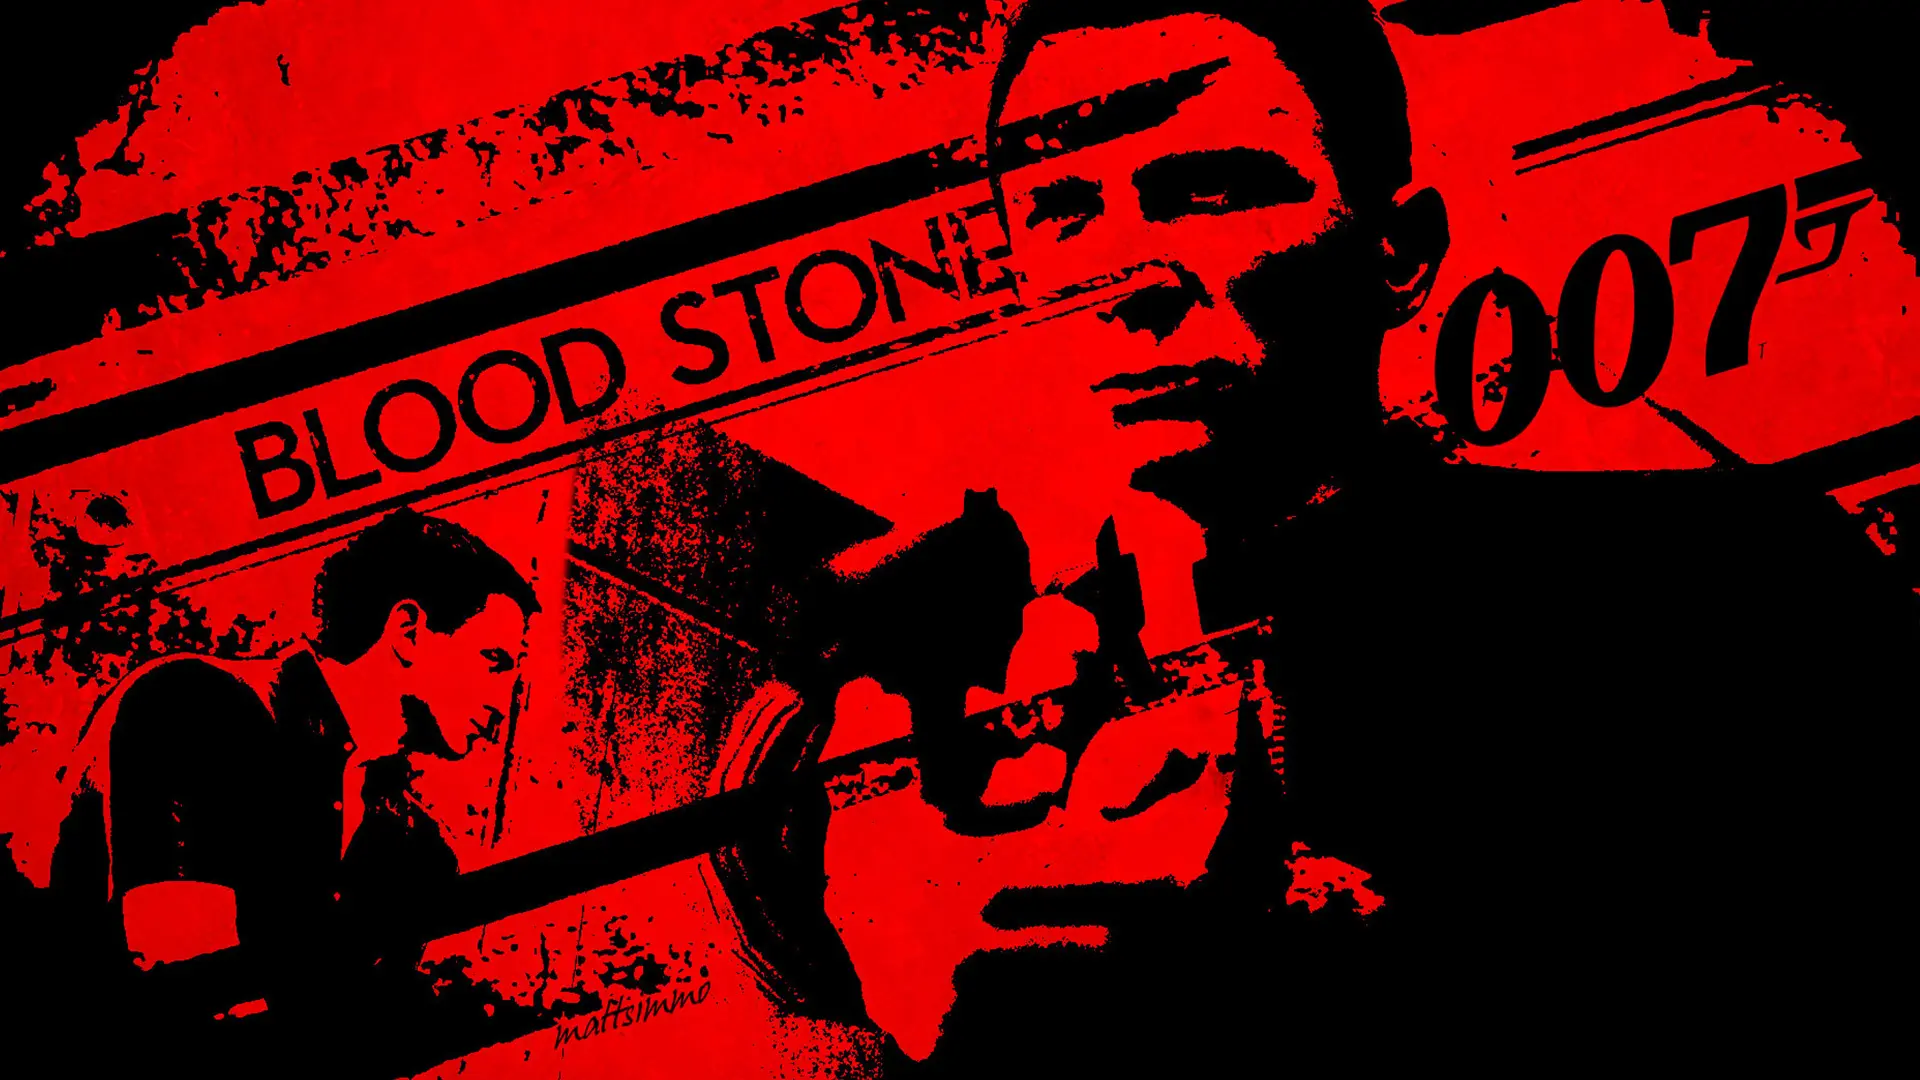 Game 007 Blood Stone wallpaper 2 | Background Image